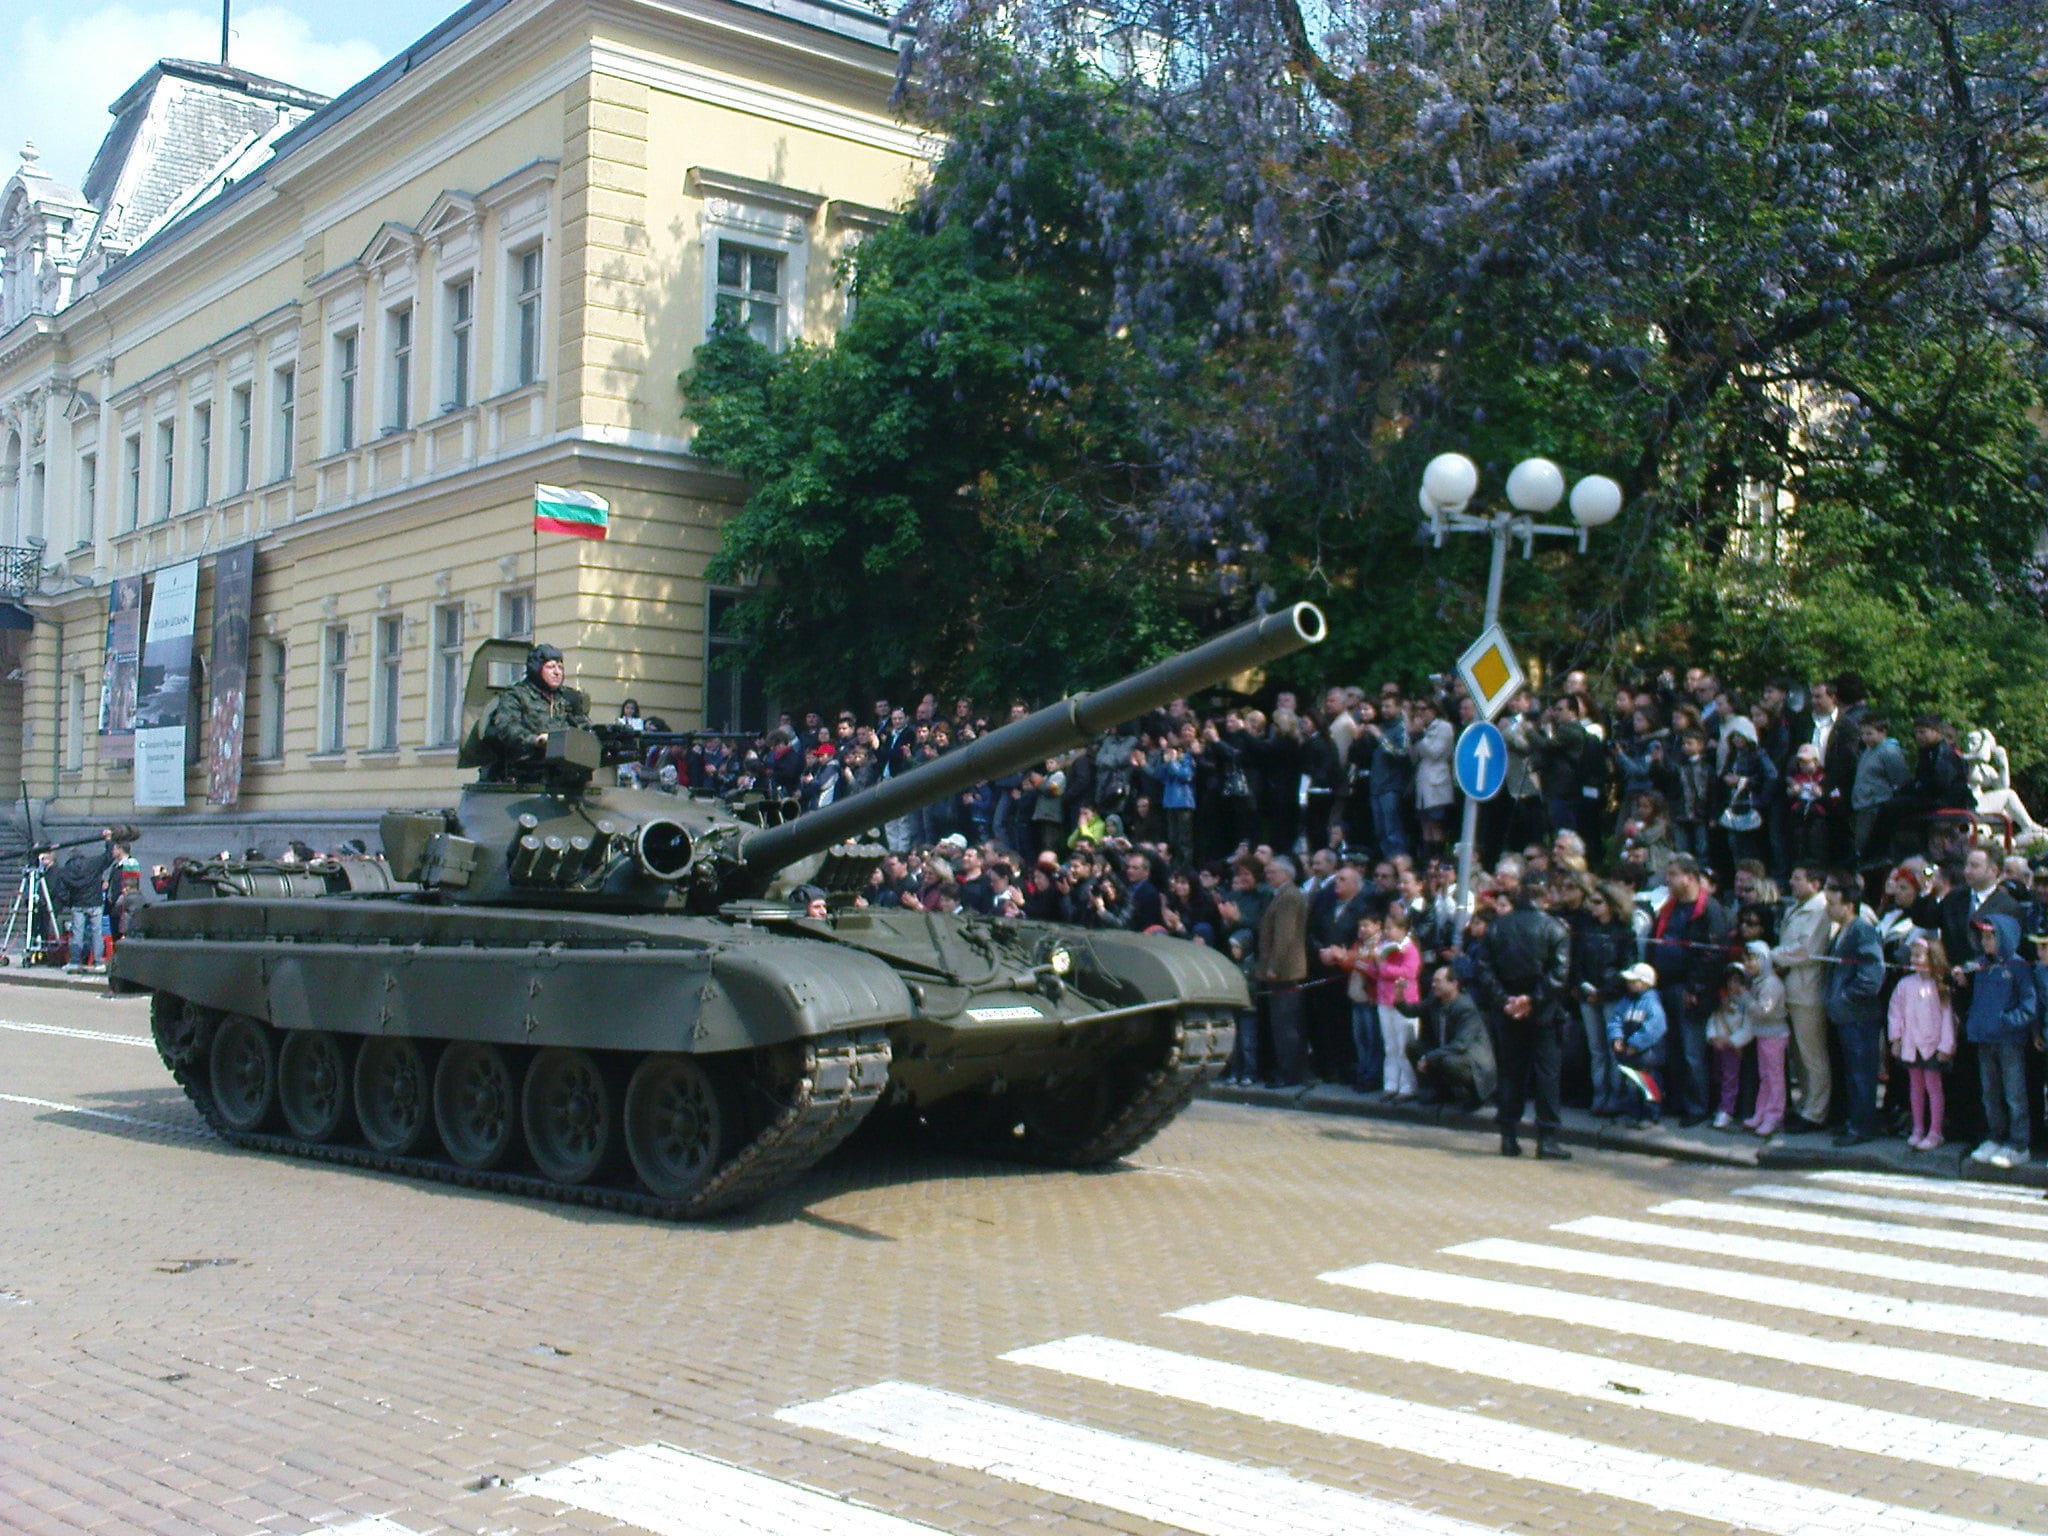 T 72m2 Tank On Army Day Parade In Sofia Inch By 30 Inch Laminated Poster With Bright Colors And Vivid Imagery Fits Perfectly In Many Attractive Frames Walmart Com Walmart Com